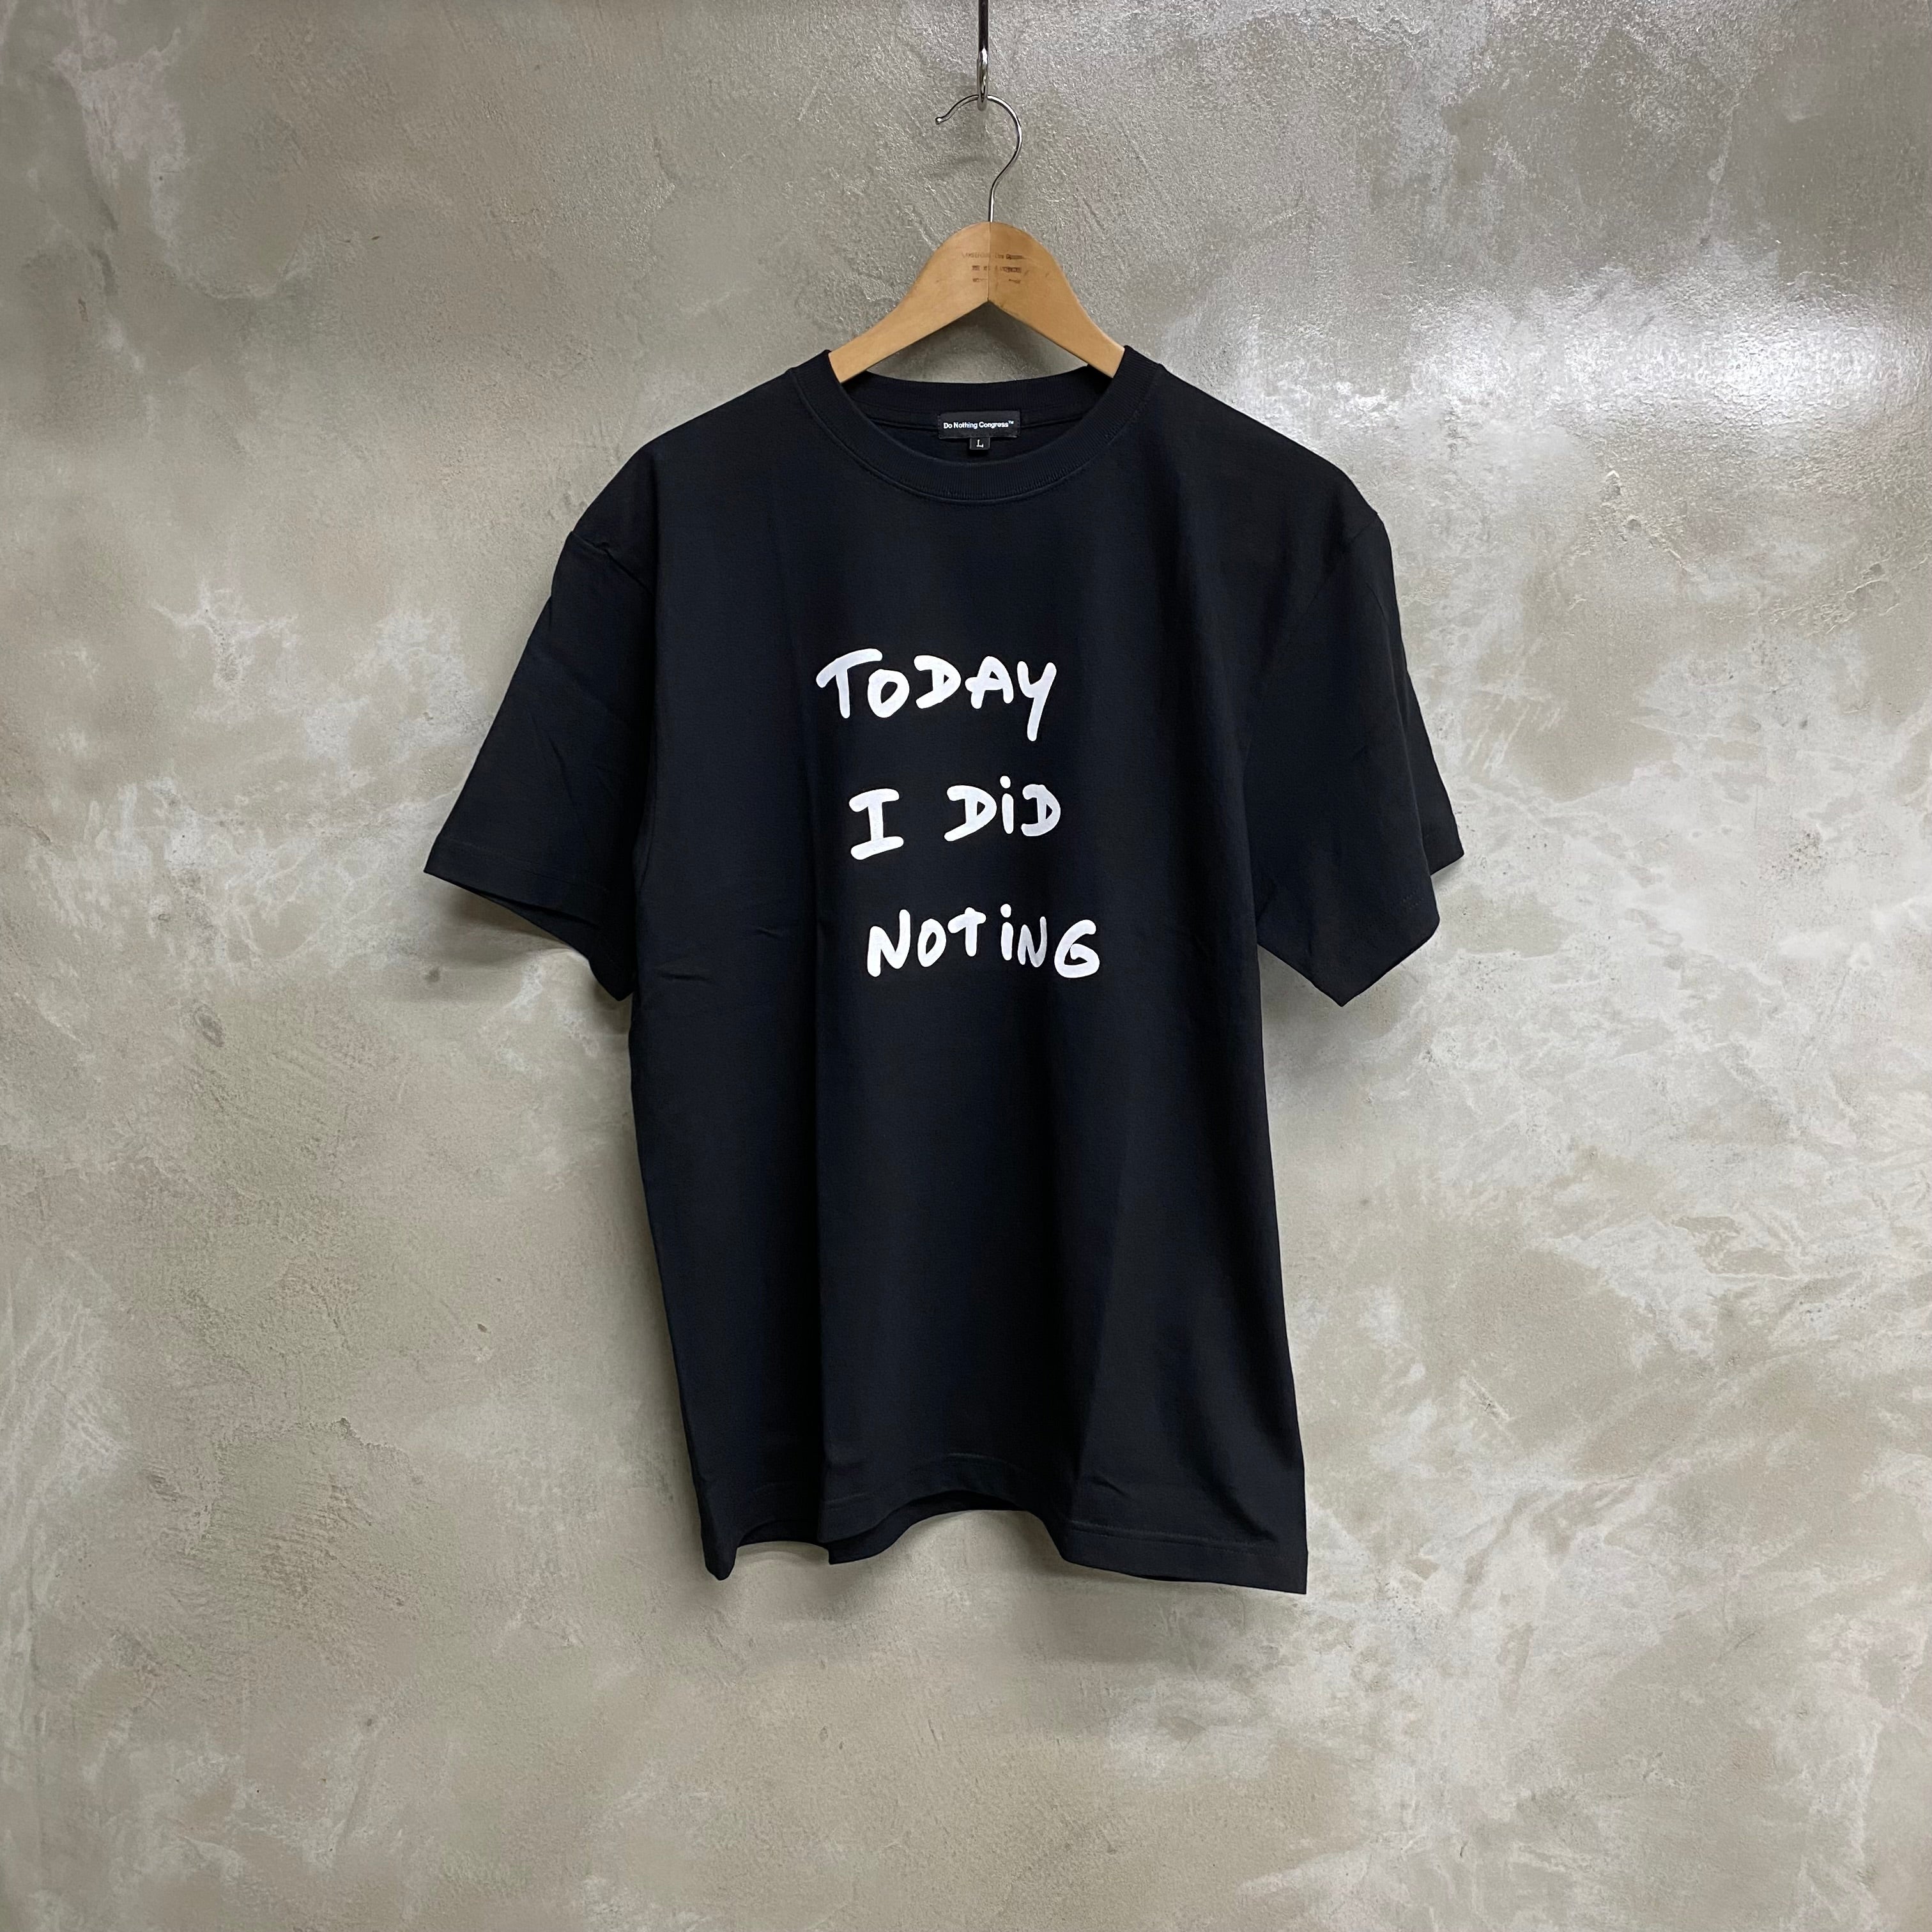 Do Nothing Congress S/S TEE SHIRT DNC x Thomas Lelu Pull  "TODAY I DID NOTING" / Do Nothing Congress